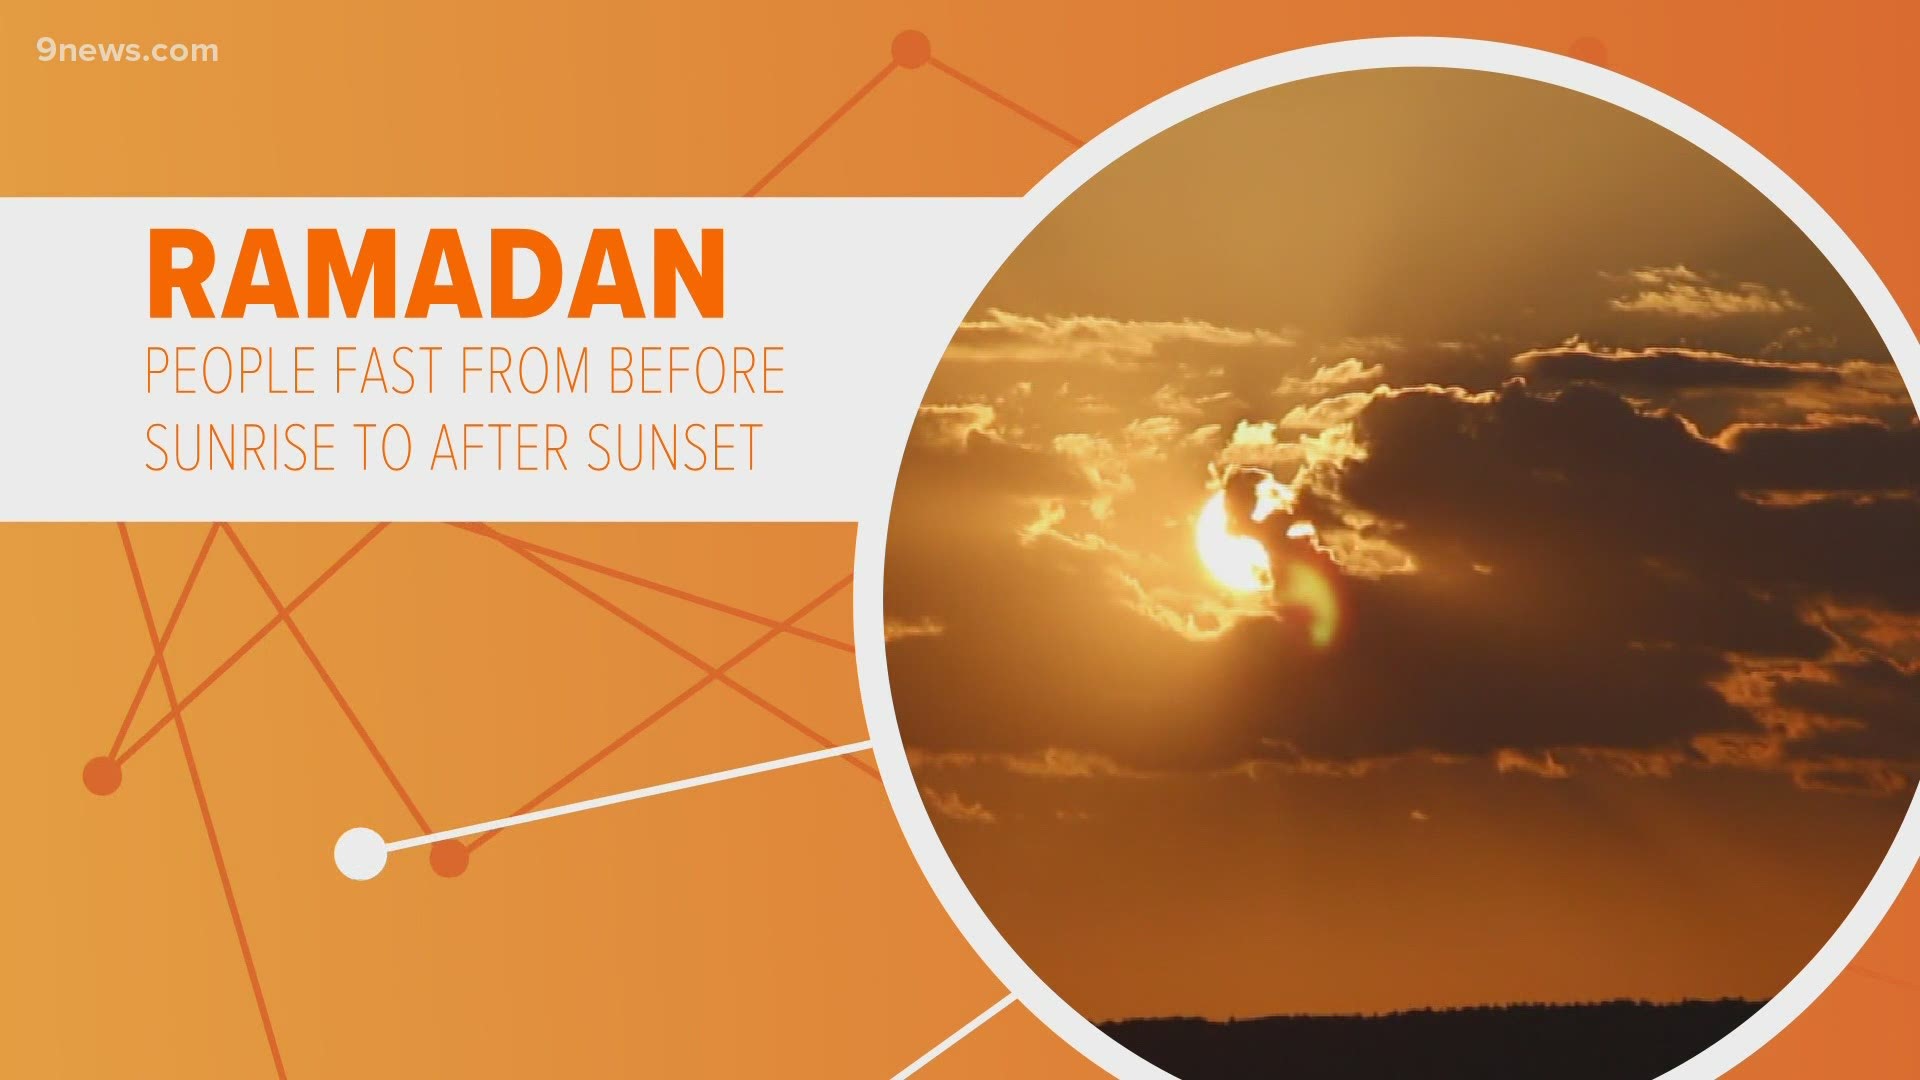 Today marks the beginning of Ramadan. Gary Shapiro connects the dots on the Islamic holy month, which begins at sundown.